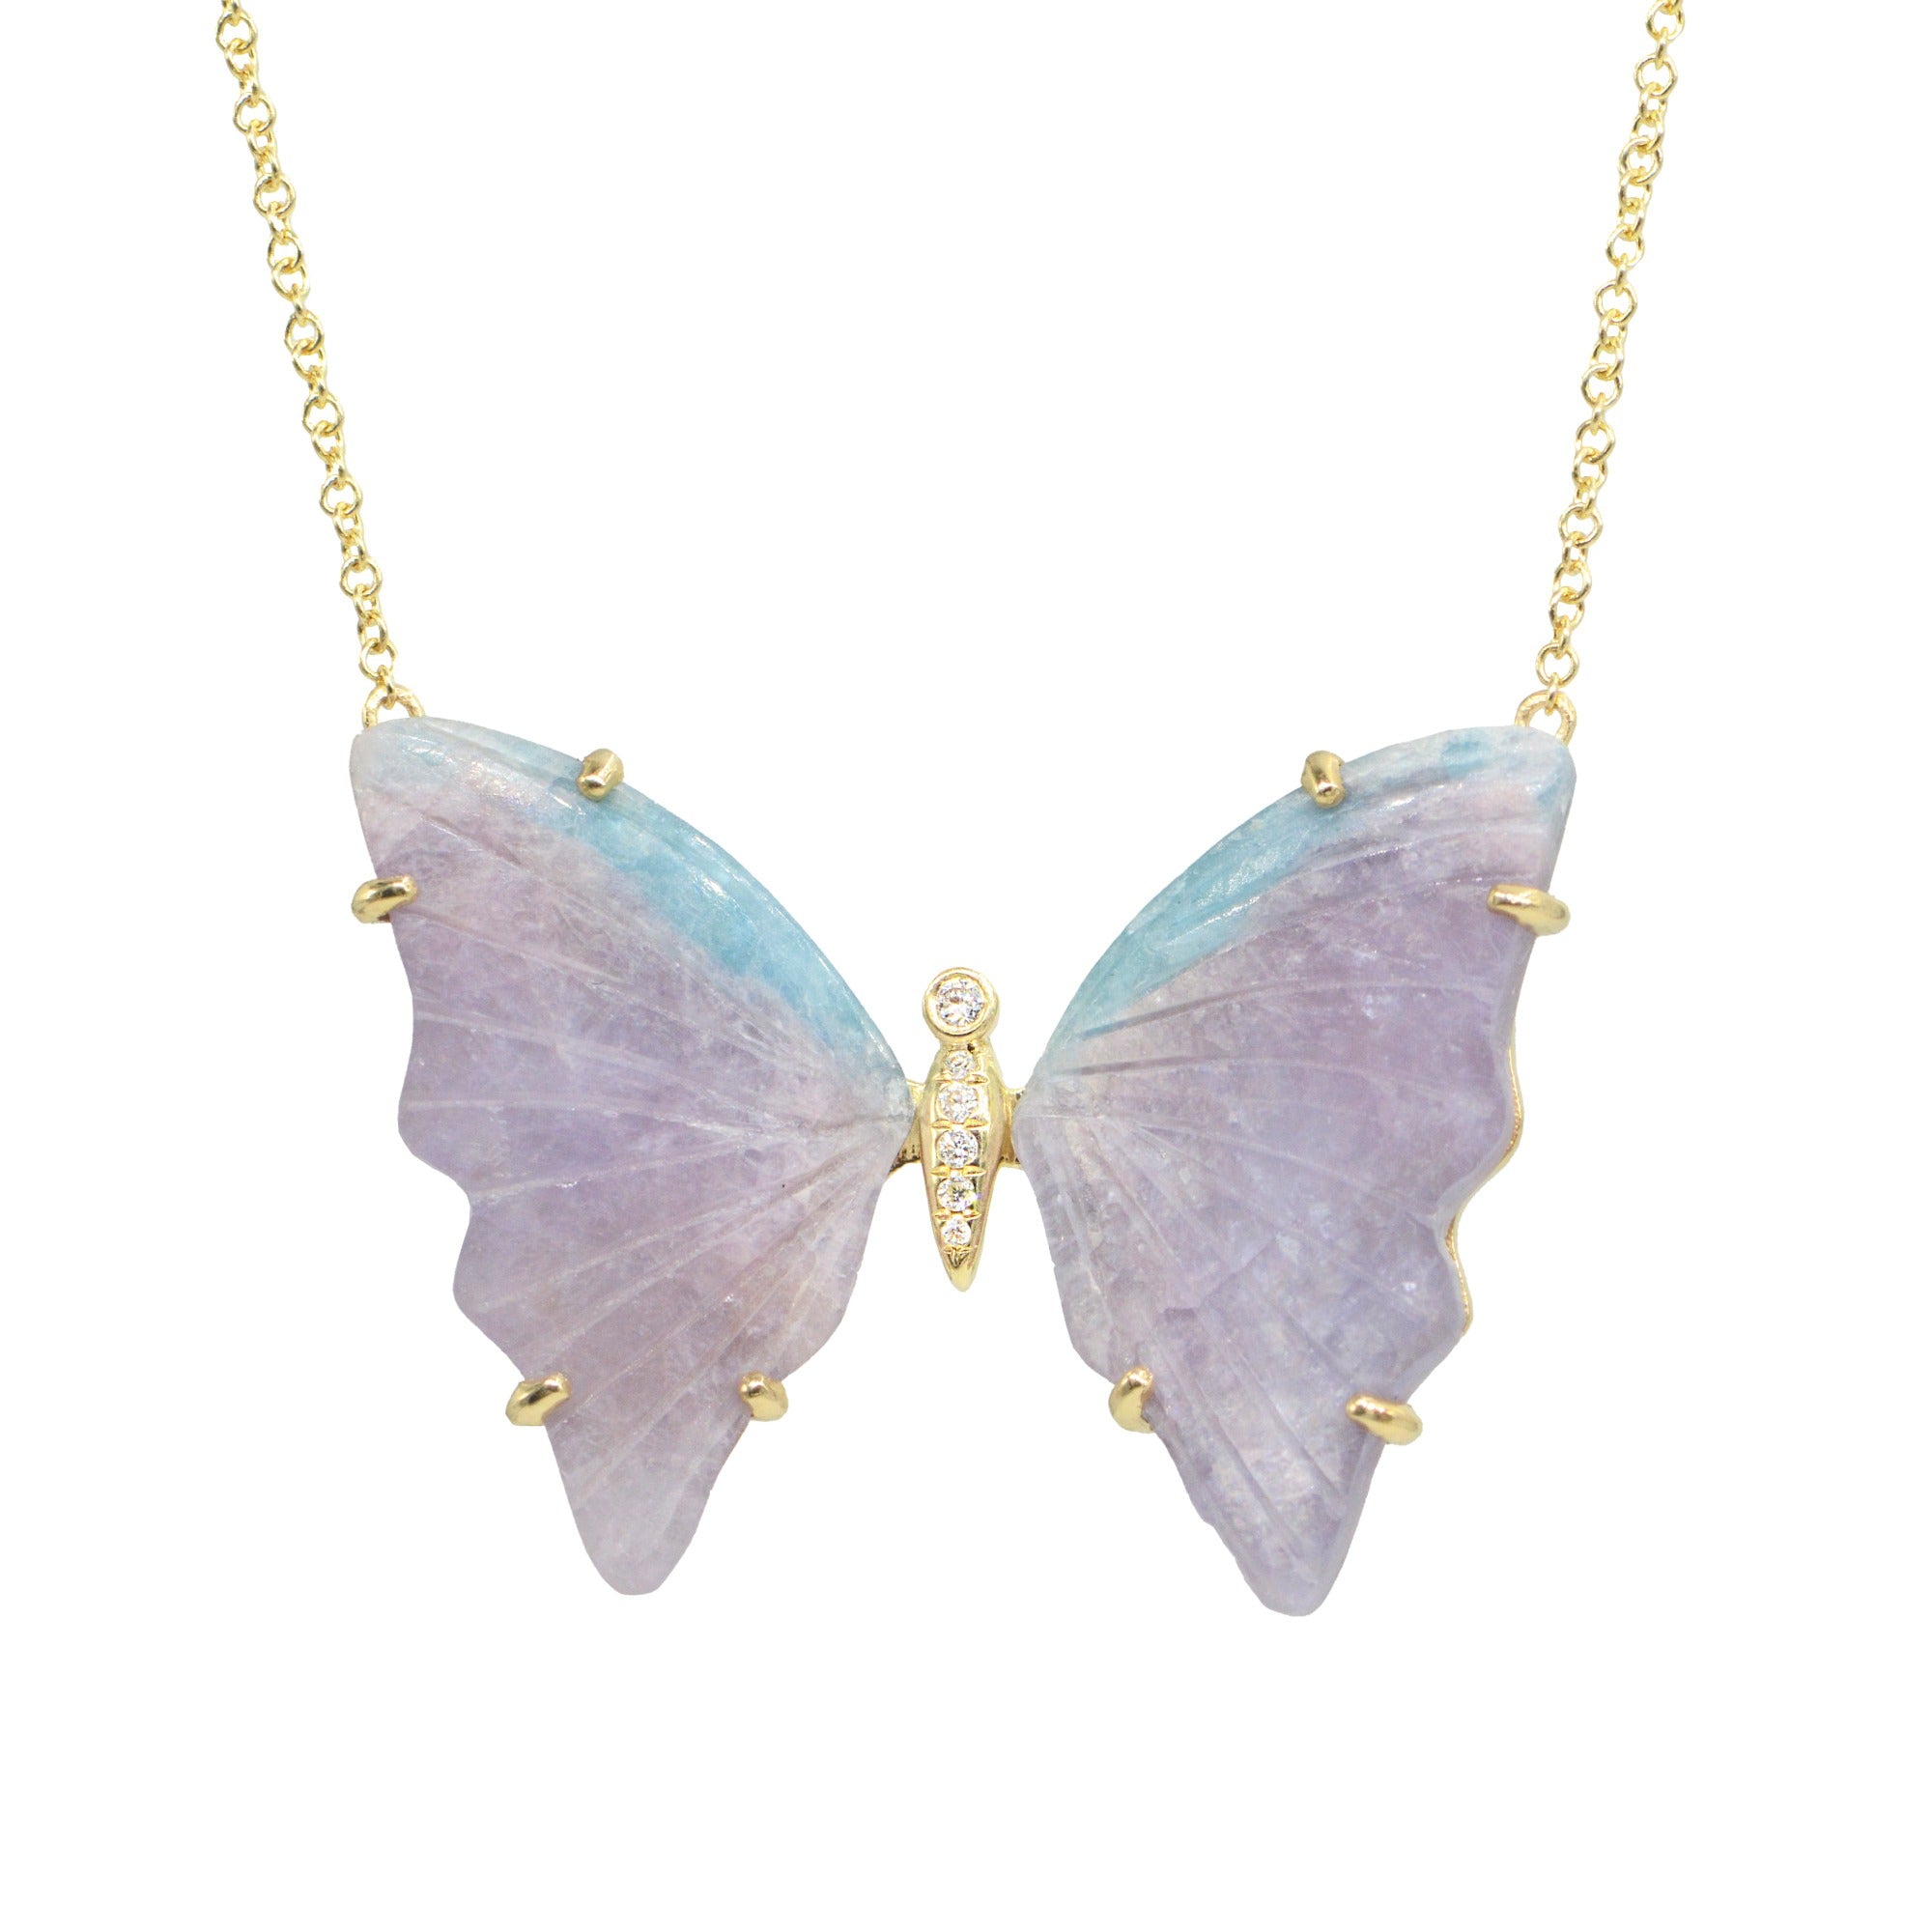 Purple and Blue Paraiba Tourmaline Butterfly Necklace with Prongs